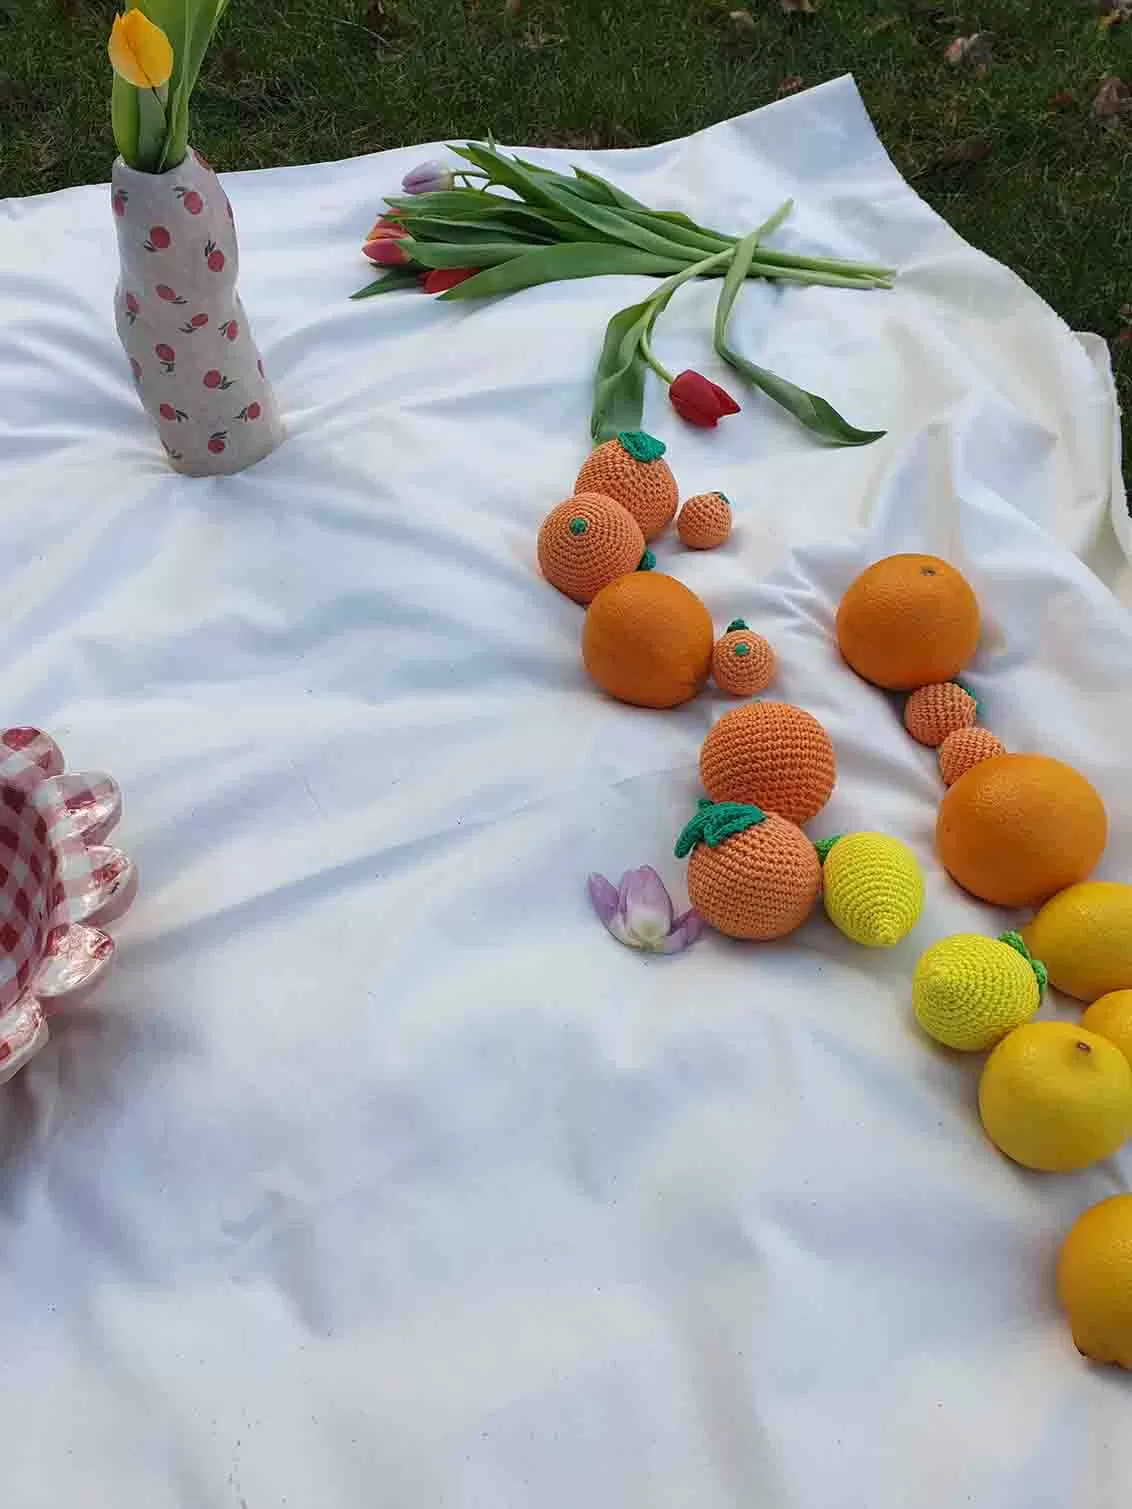 Crochet oranges and lemons on a white piece of fabric with handmade ceramics and tulips in the background.